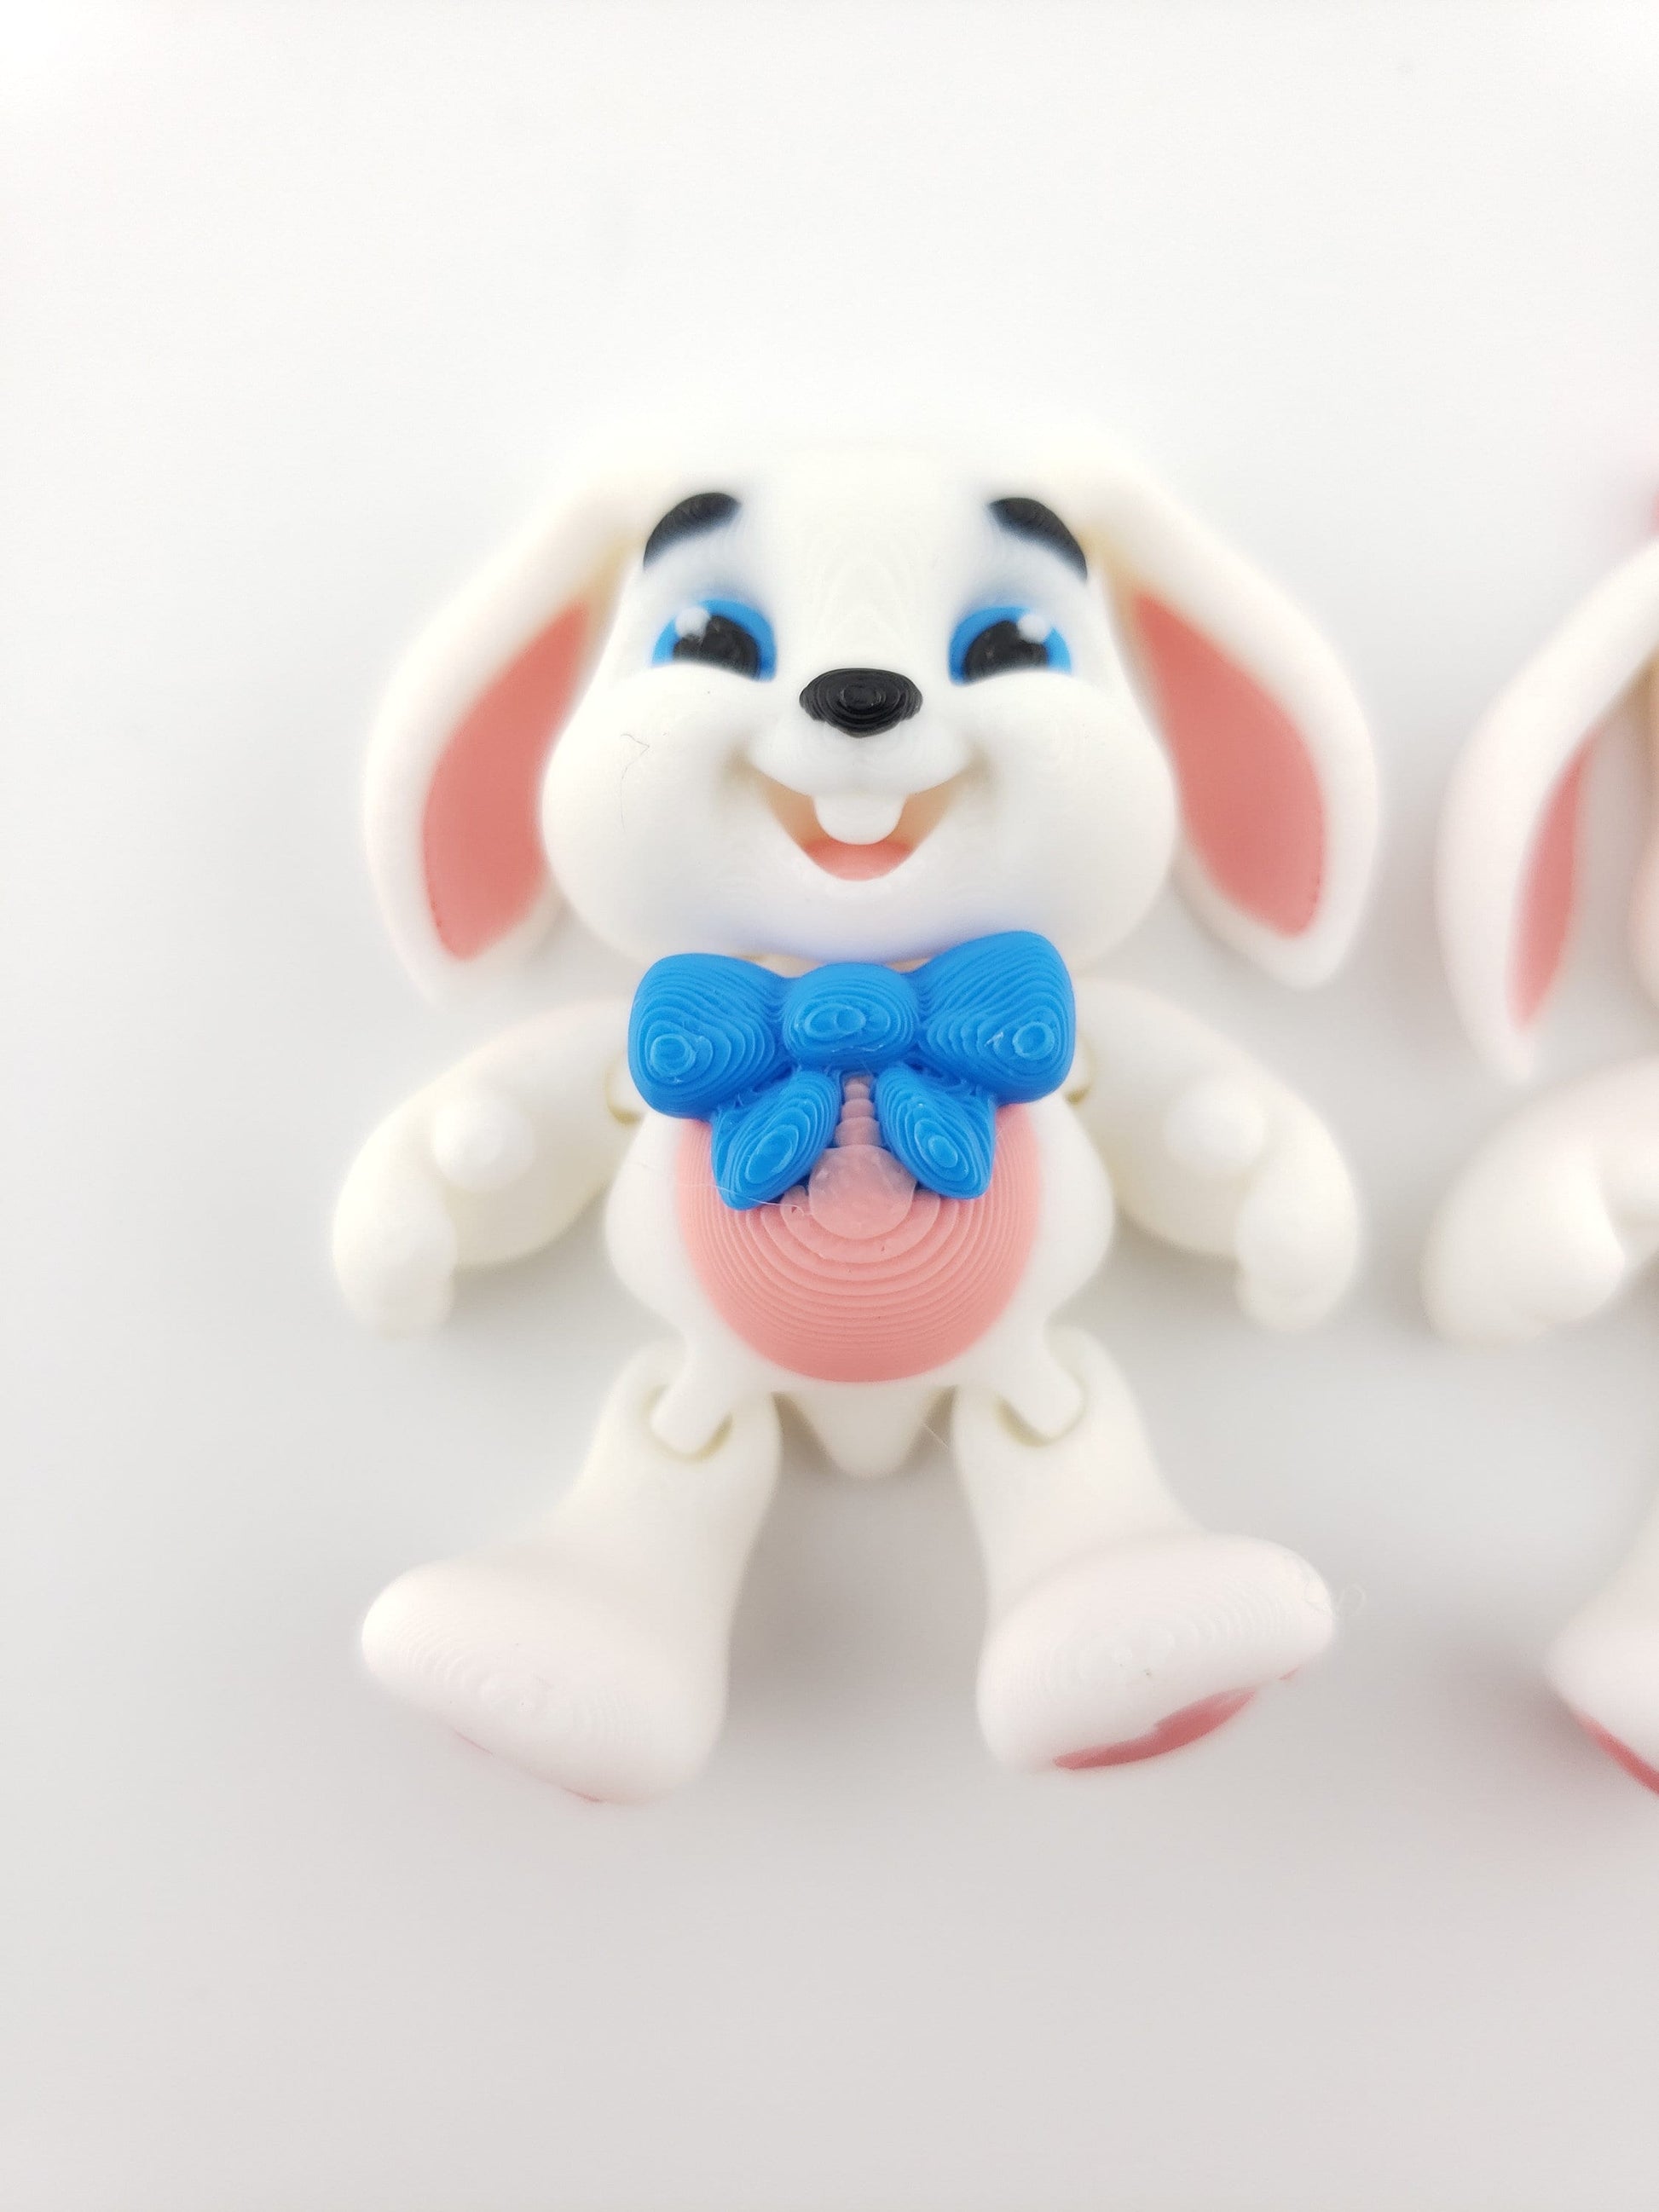 Bunny Couple - 3D Printed Fidget Fantasy Creature - Authorized Seller - Articulated Toy Figure